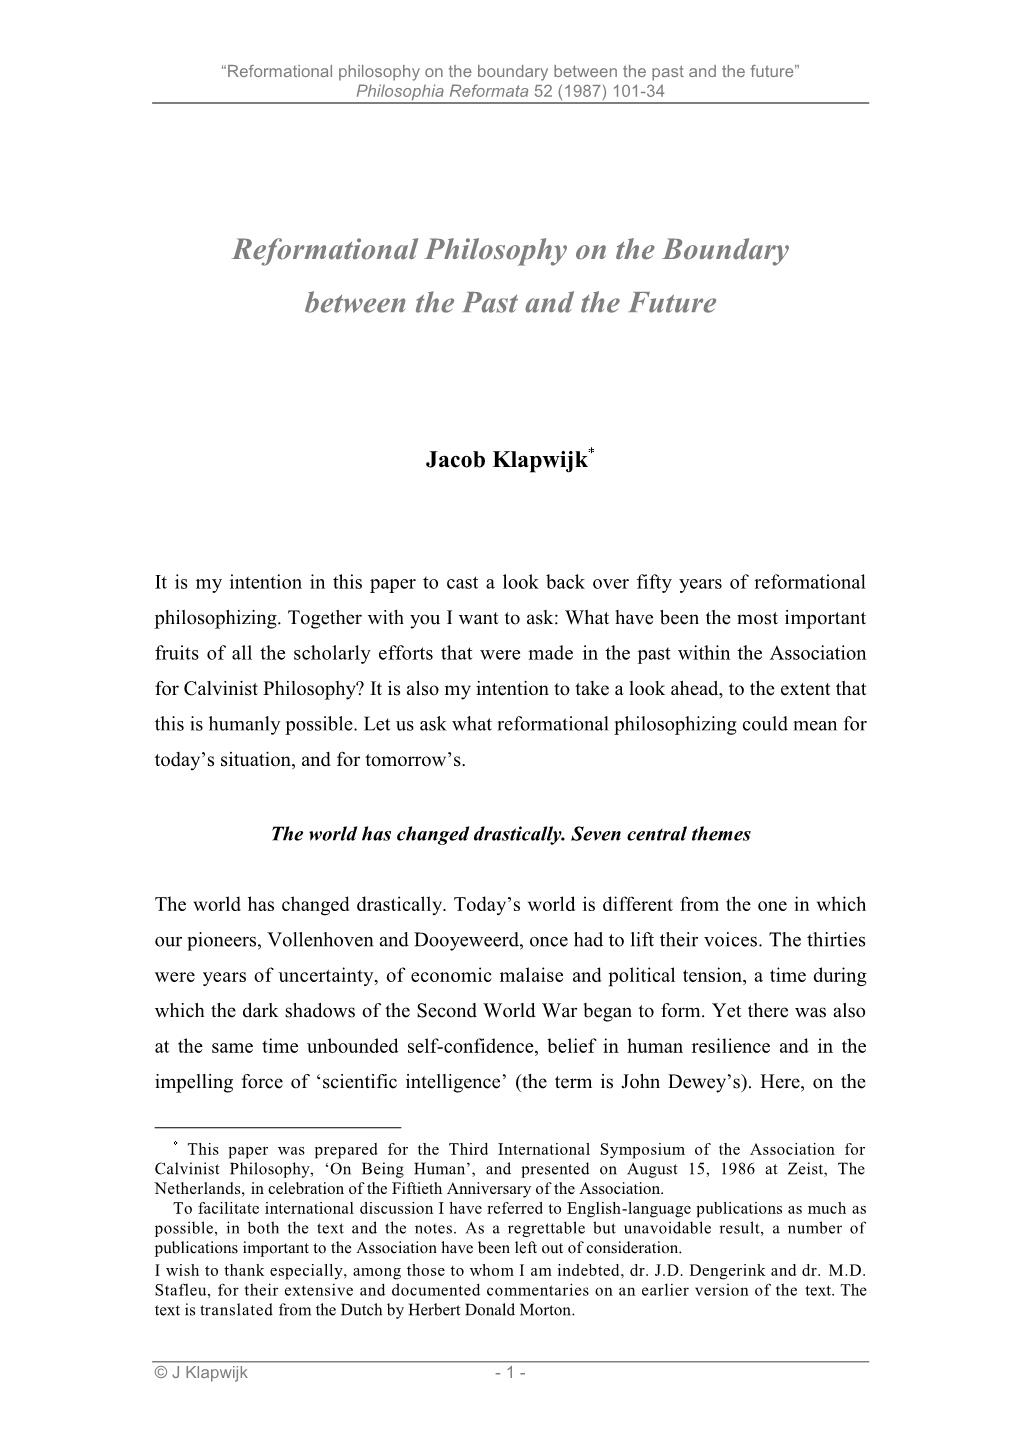 Reformational Philosophy on the Boundary Between the Past and the Future” Philosophia Reformata 52 (1987) 101-34